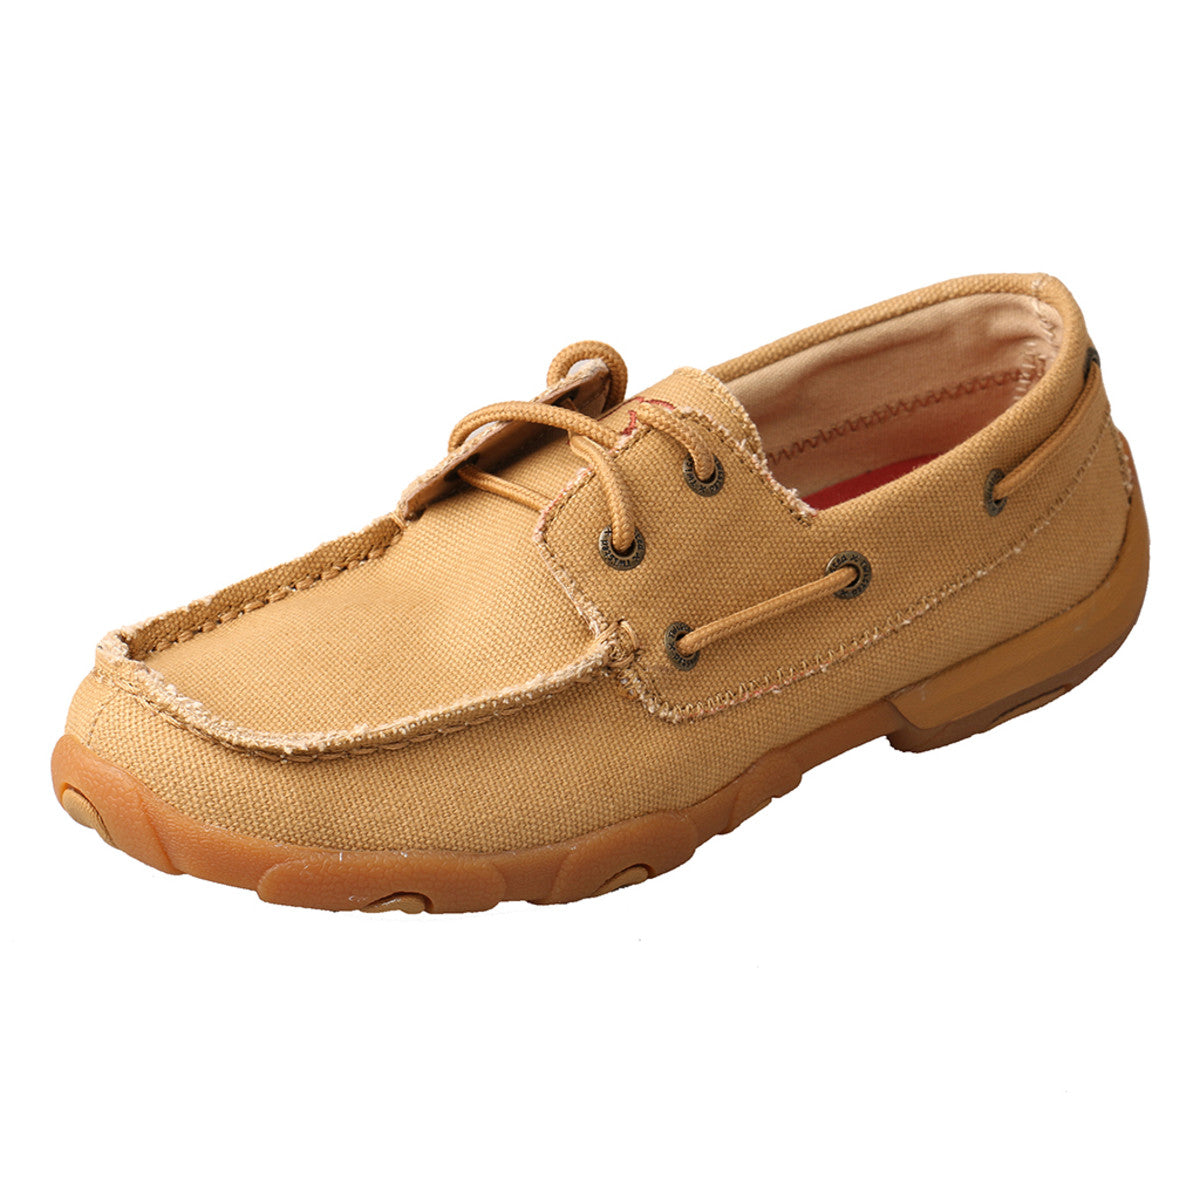 Women's Twisted X Boat Shoe Driving Moccasins in Khaki Canvas from the side view